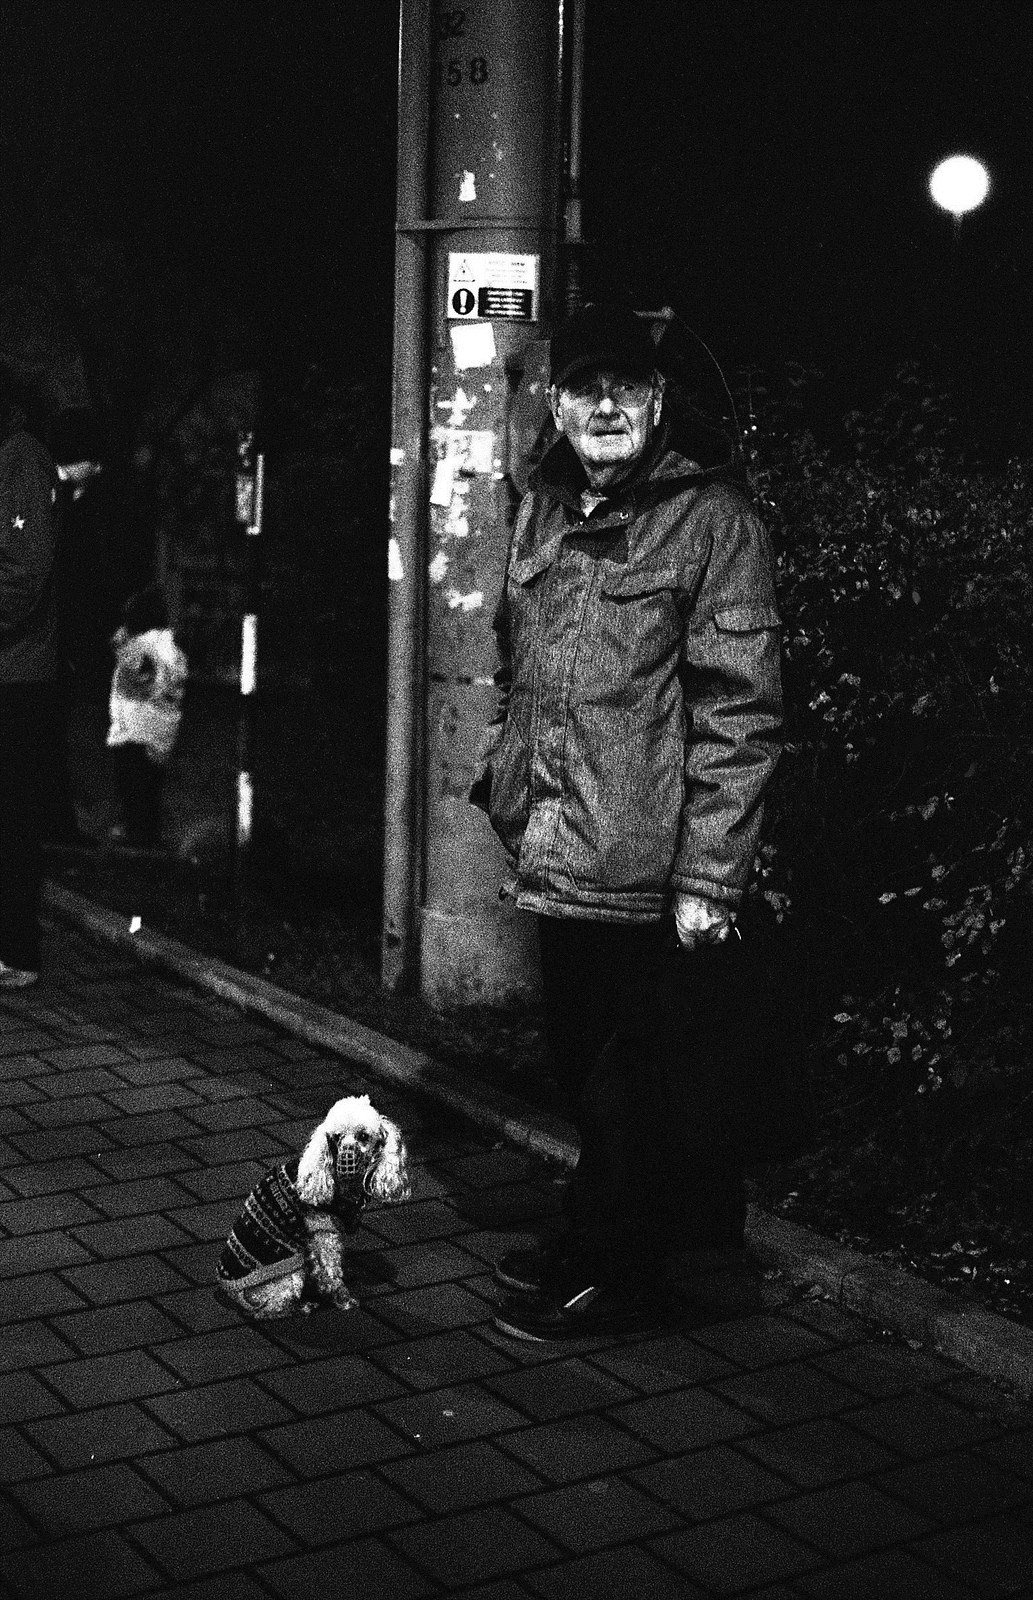 Canon Rebel XS - Man with a Little Dog at the Bus Stop